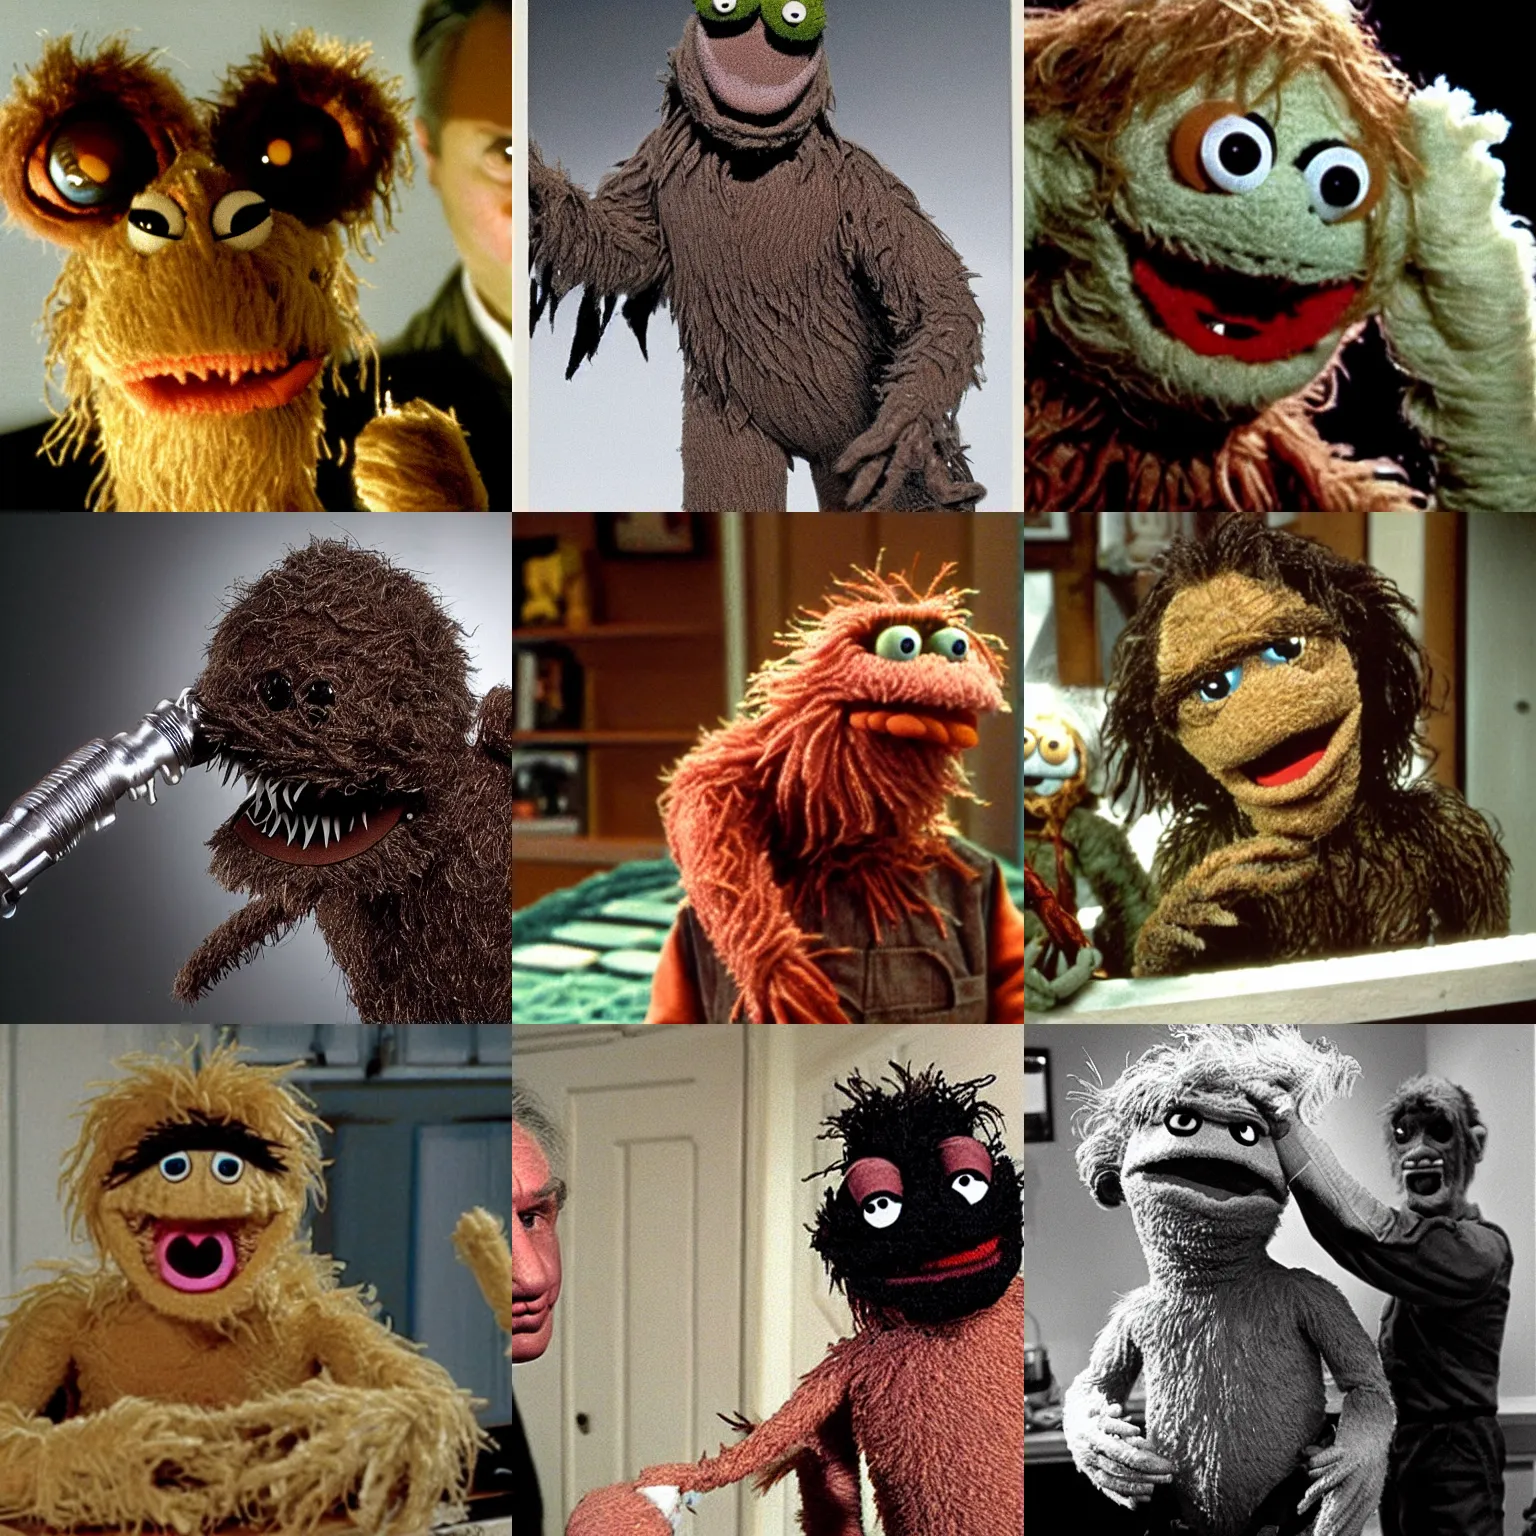 Prompt: creature from jphn carpenter's the thing as a muppet